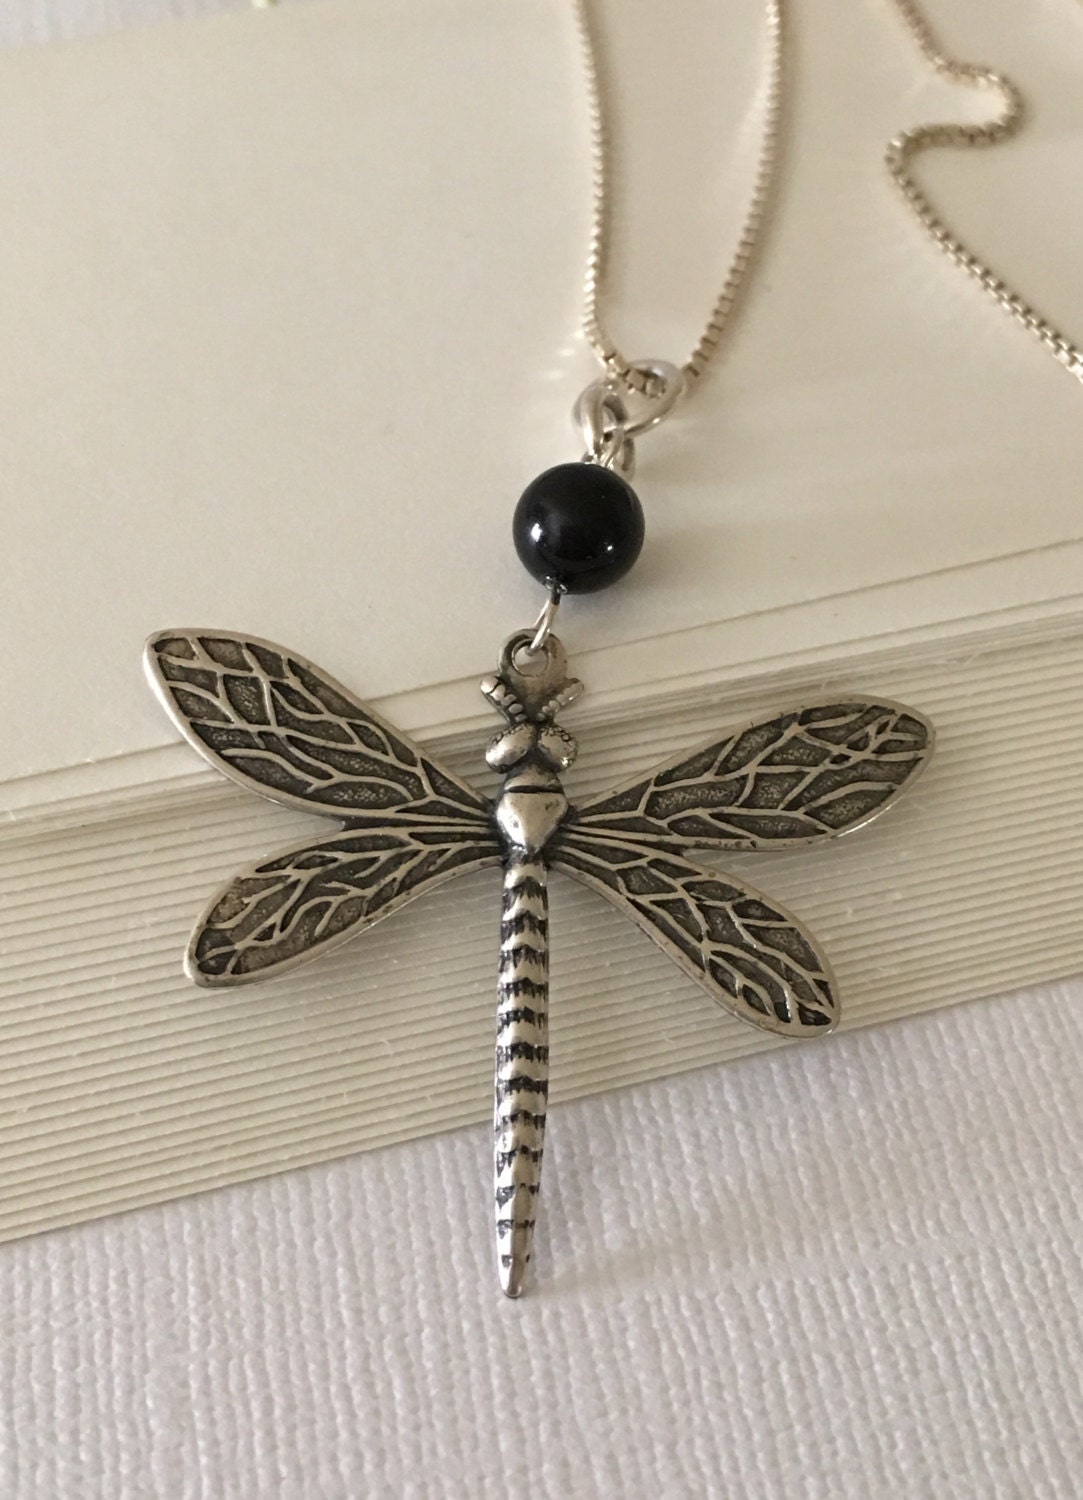 Necklace-Dragonfly Pendant-Sterling Silver Box Chain-Black | Etsy